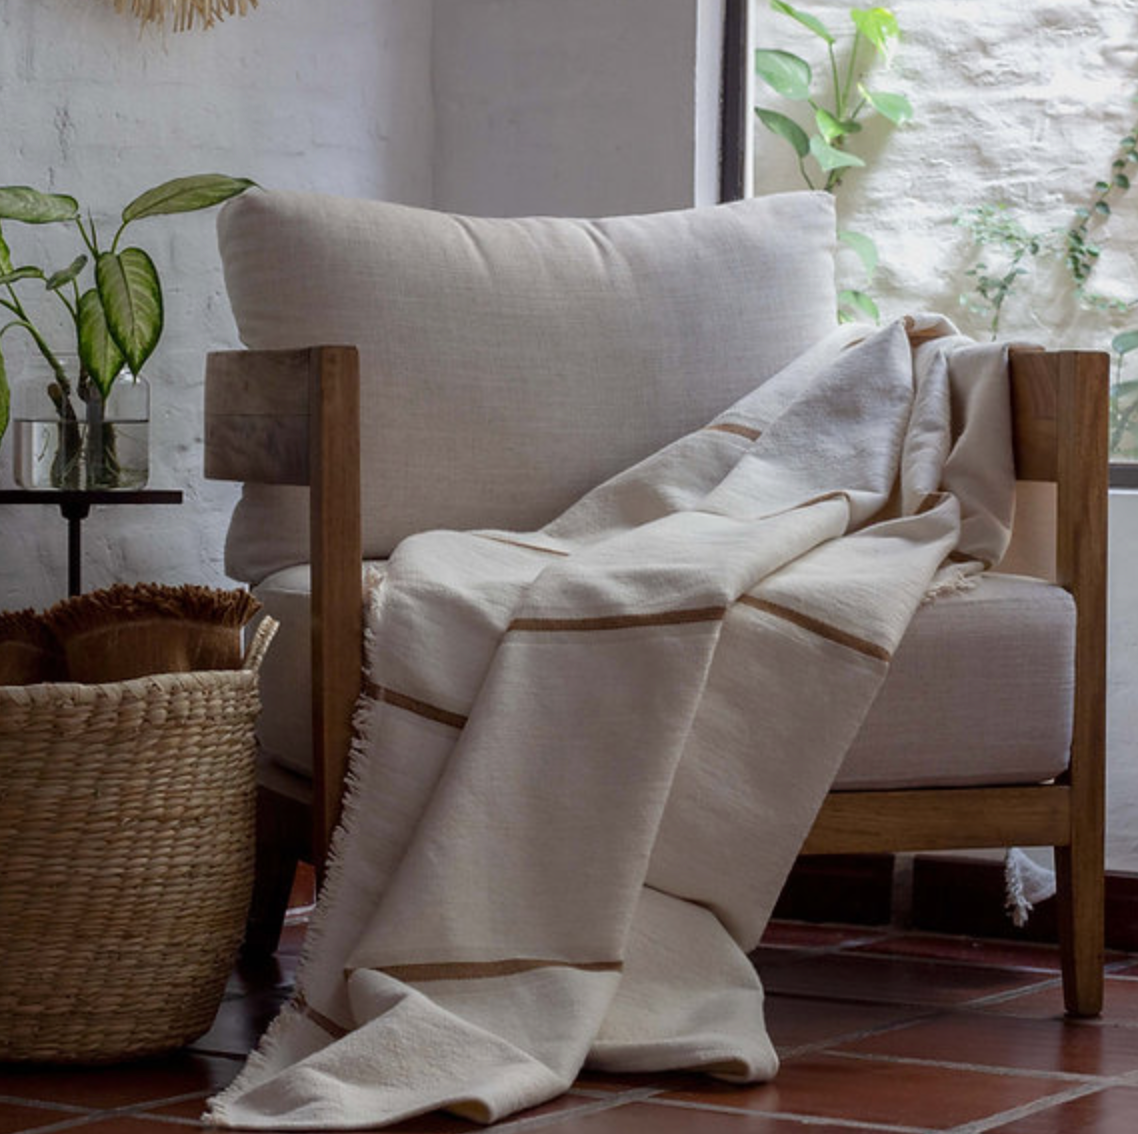 Poyvi Olimpia Leather blankets handmade in Paraguay